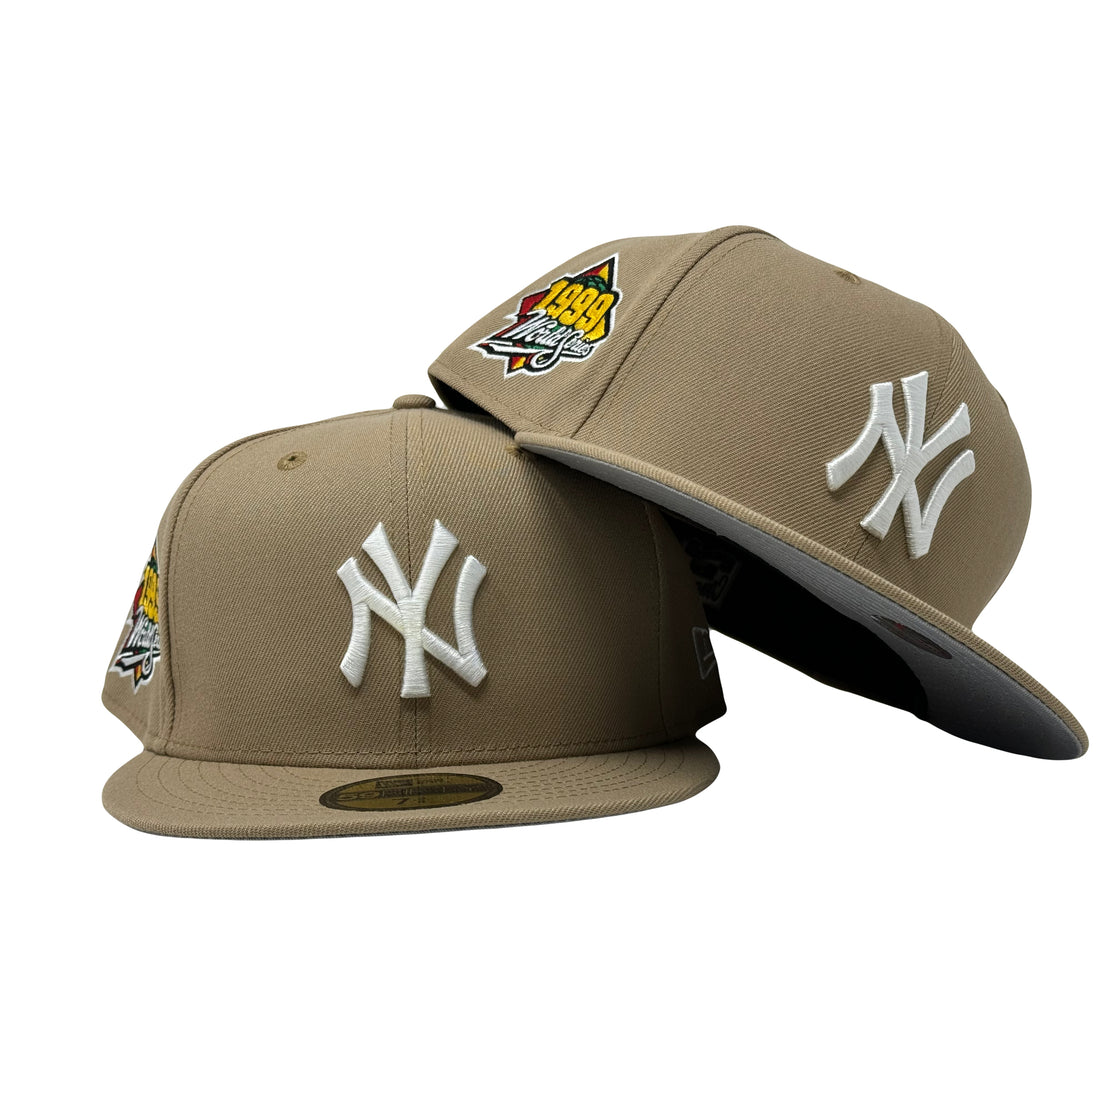 New York Yankees 1999 World Series Camel 5950 New Era Fitted Hat